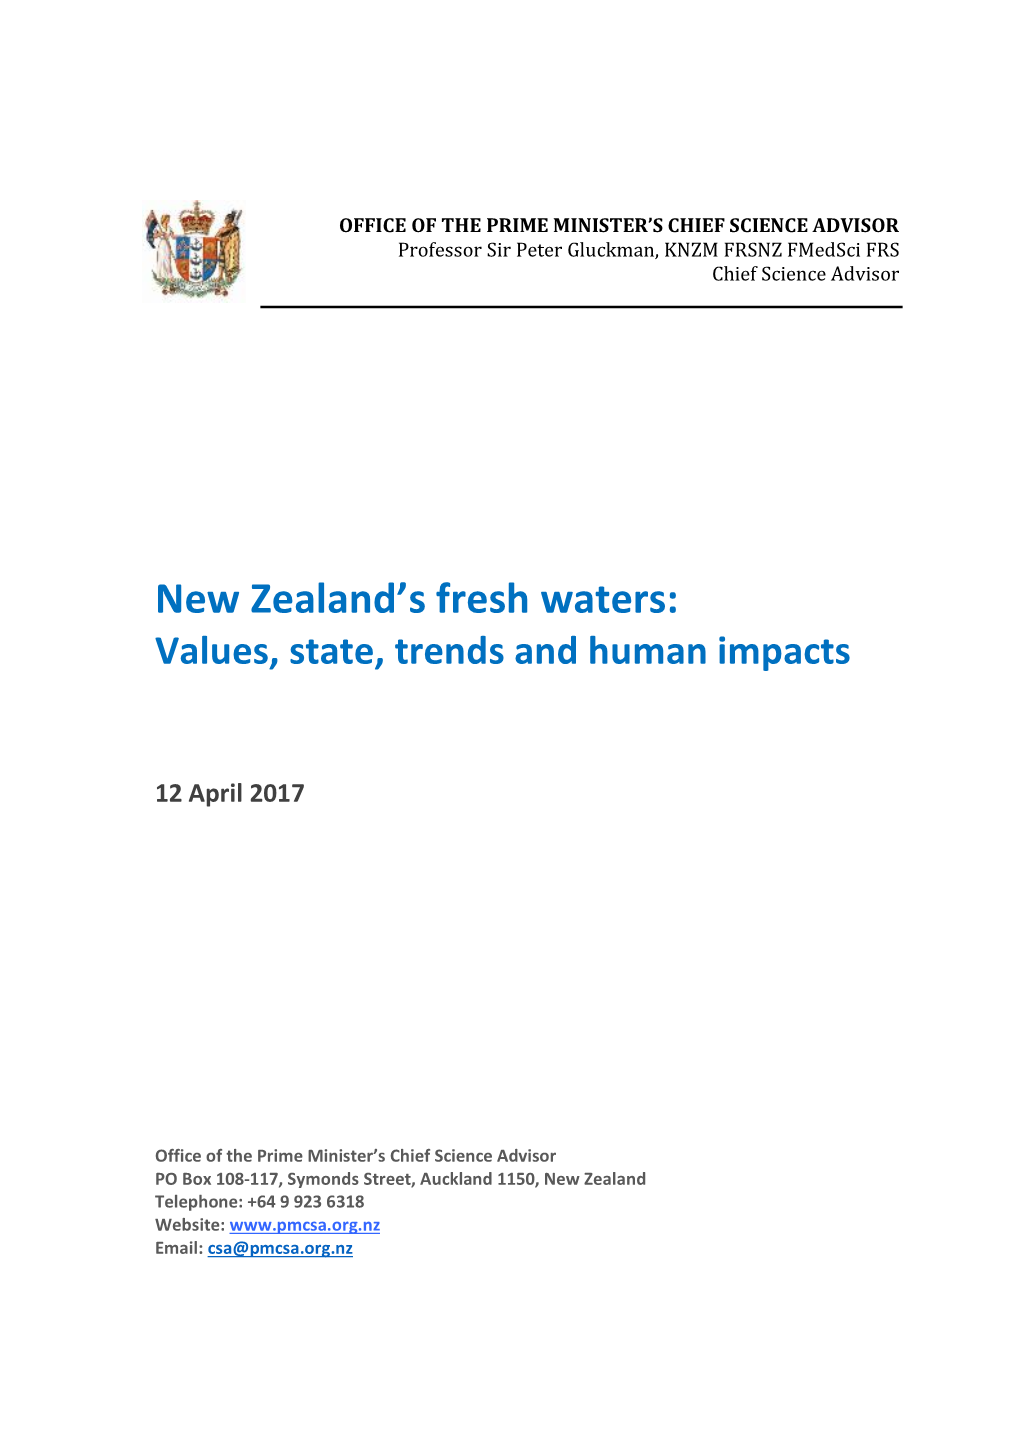 New Zealand's Fresh Waters: Values, State, Trends and Human Impacts